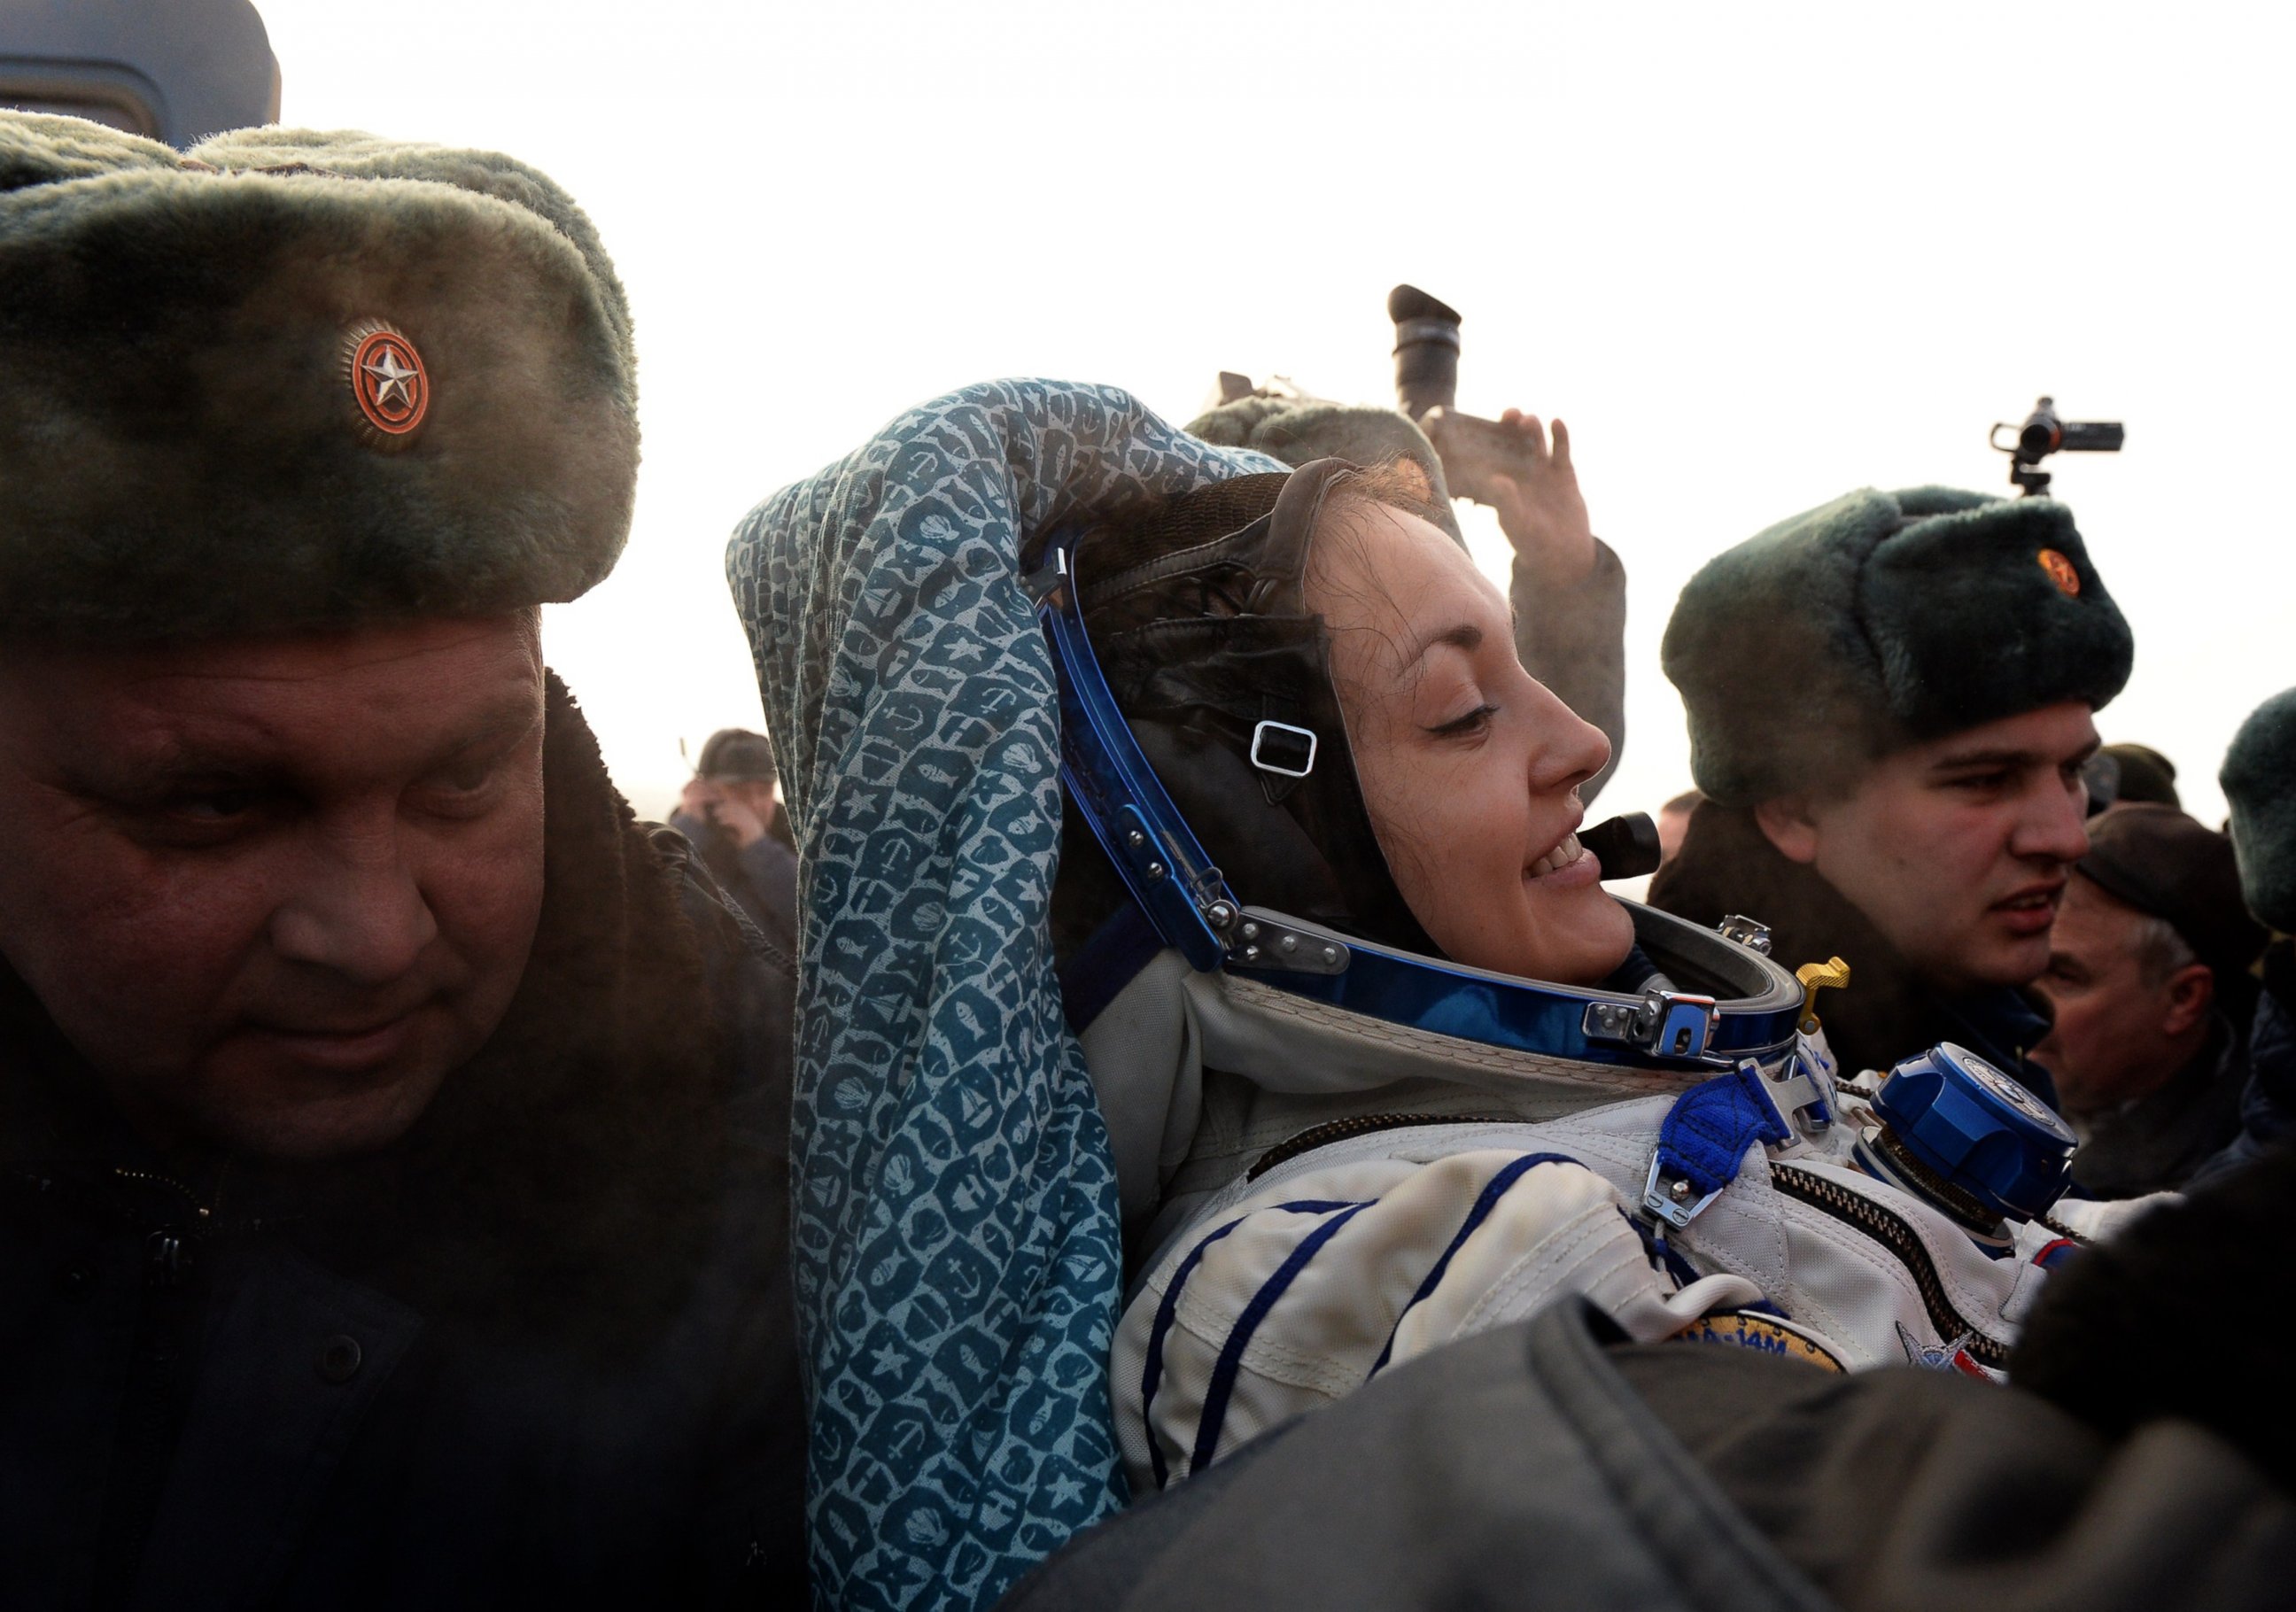 PHOTO: Russia's space agency ground personnel help Russian cosmonaut Yelena Serova after the landing of the Soyuz TMA-10M capsule in the city Karaganda in Kazakhstan, March 12, 2015.